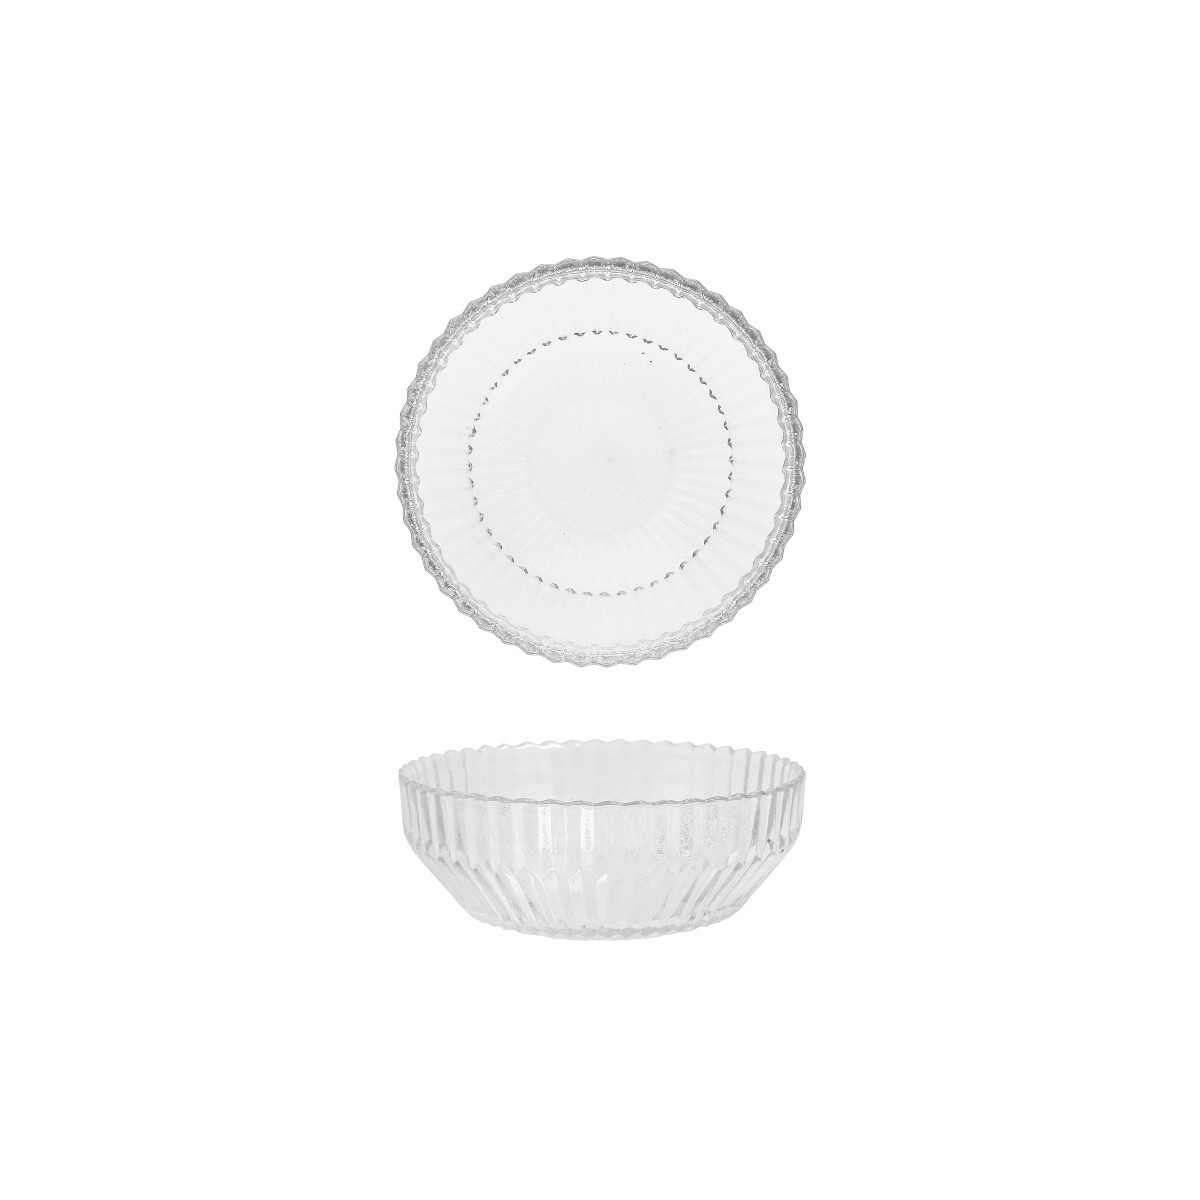 Archie Clear Cereal Bowl 22.8oz